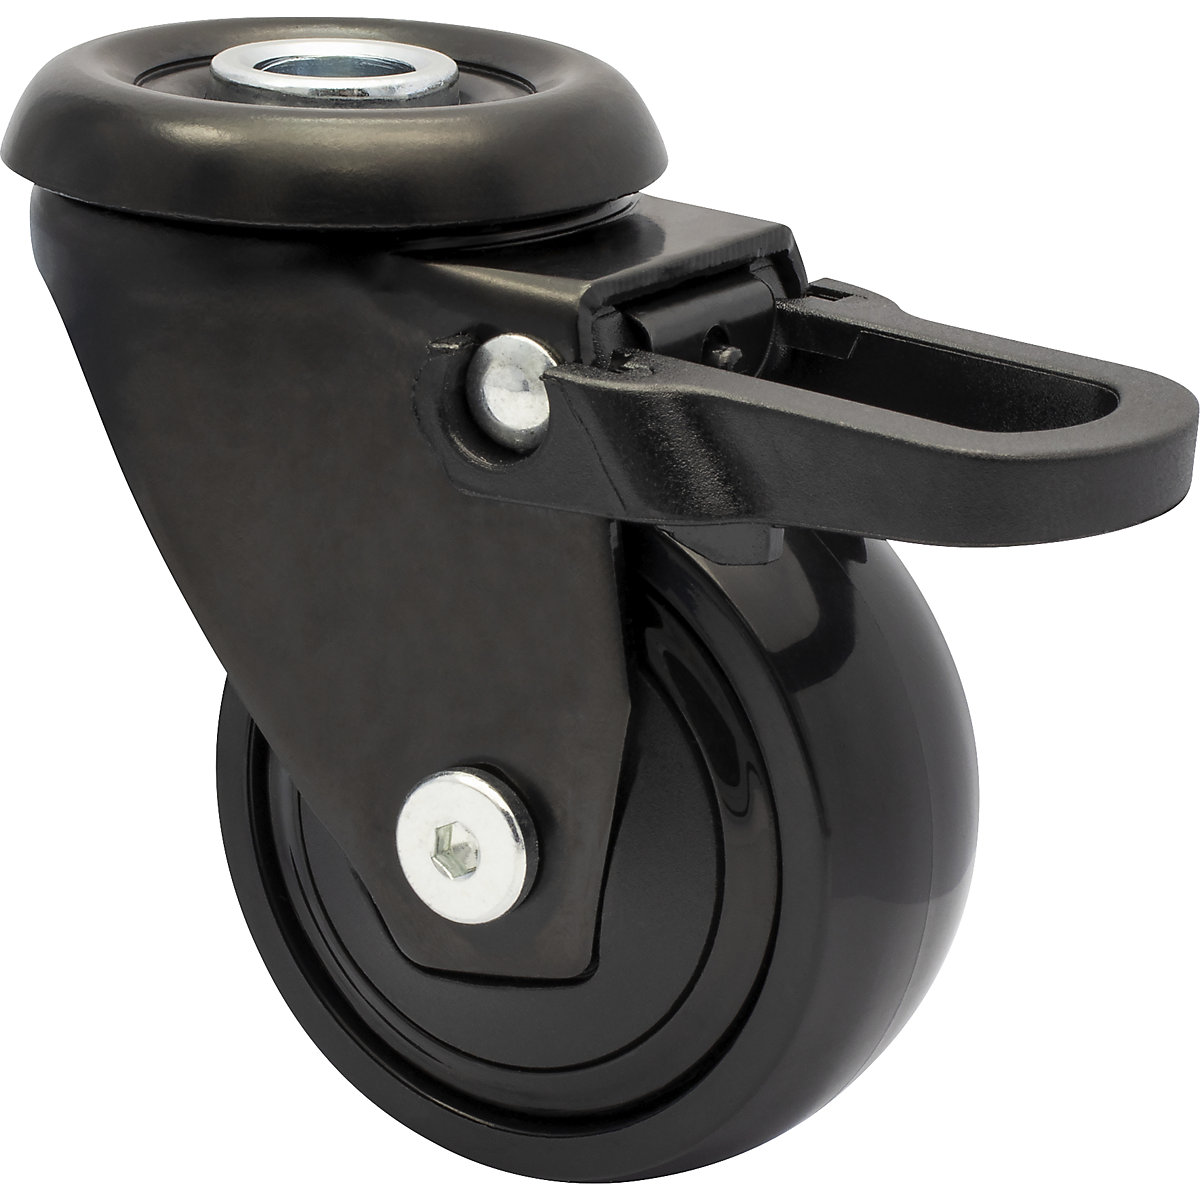 3C series swivel castor for furniture with total wheel stop – Wagner